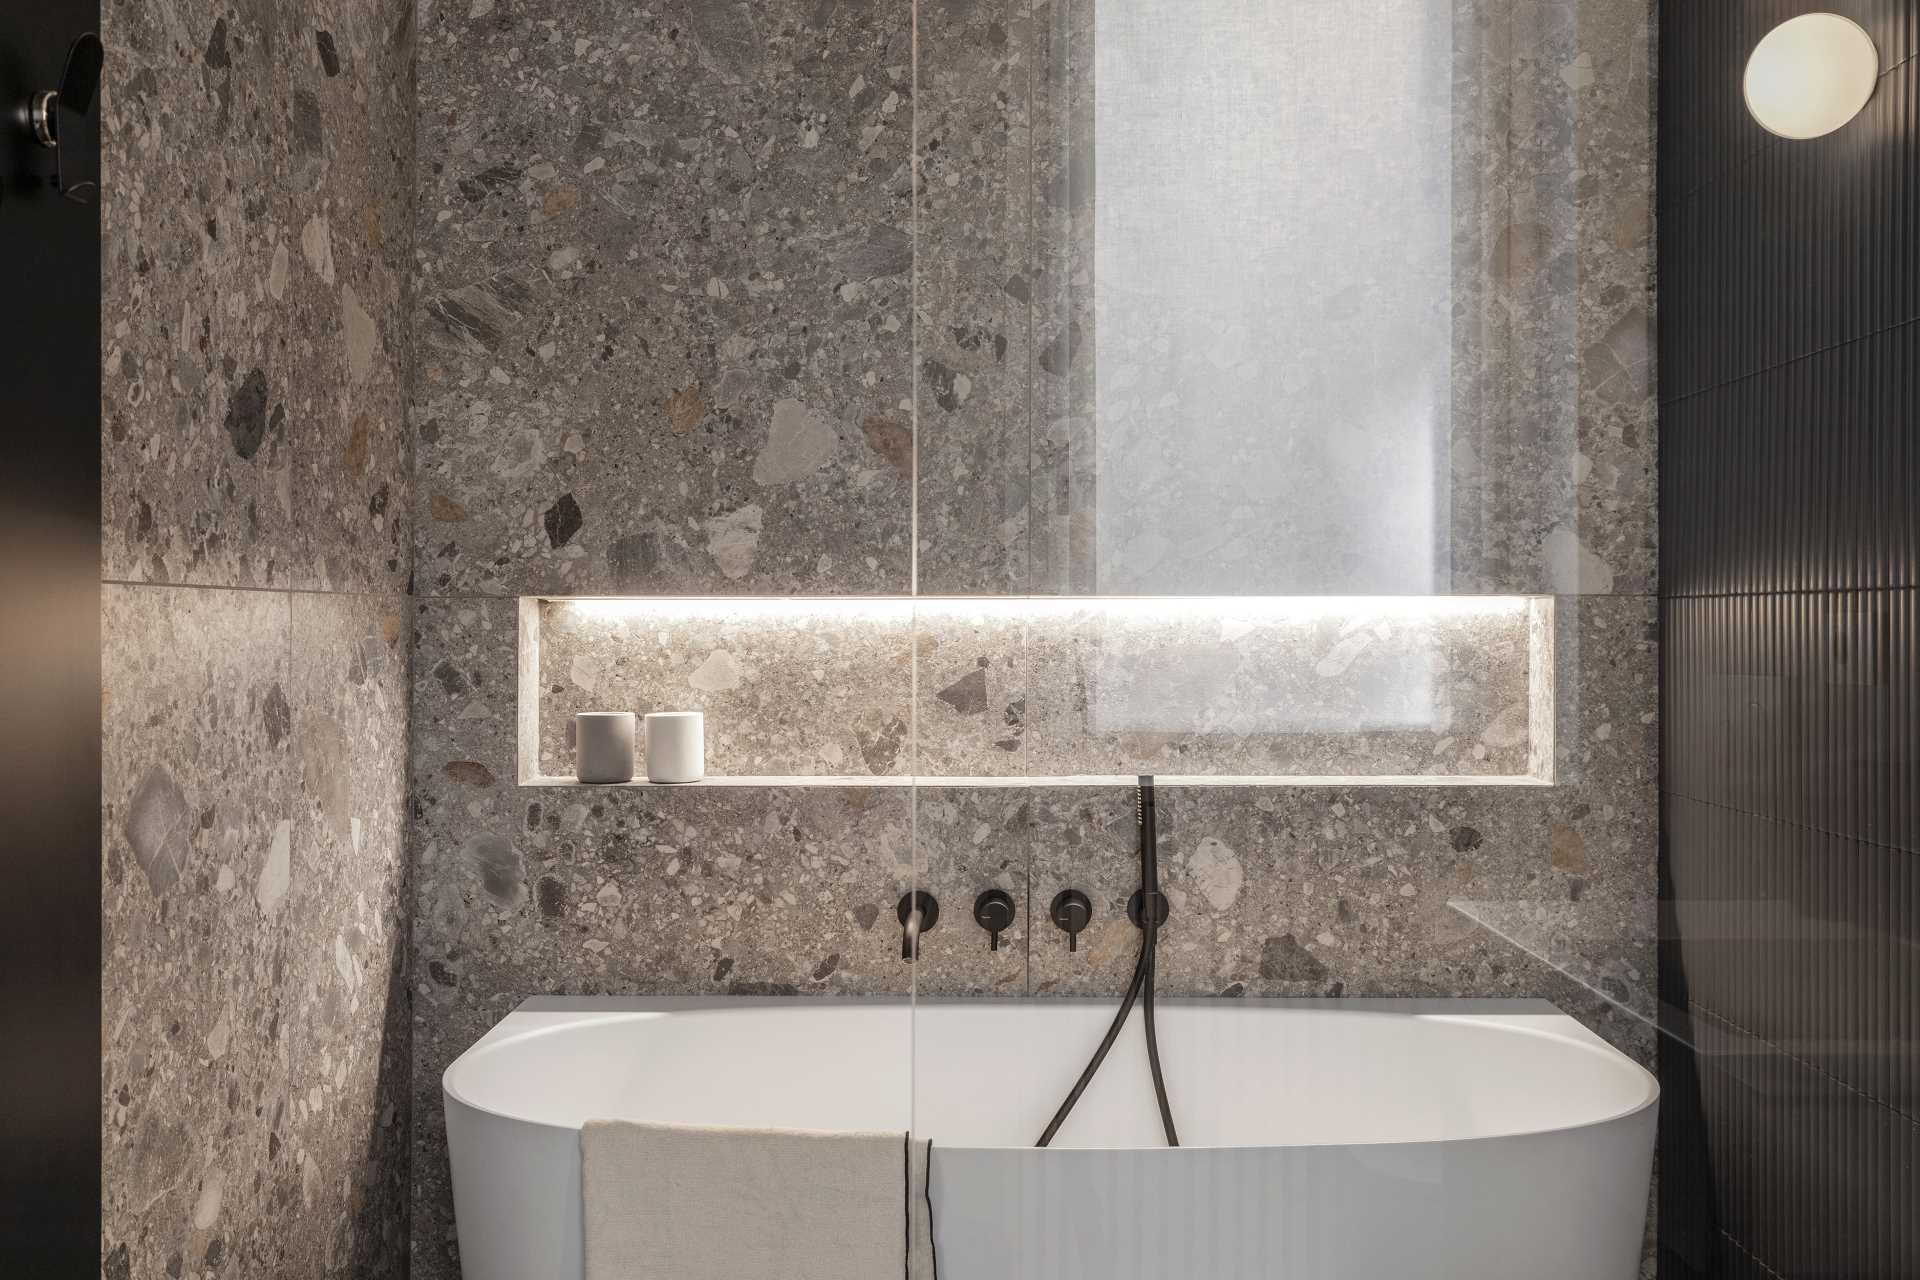 This primary en-suite bathroom has a wall of gunmetal tiles that complements the Ceppo di Grè stone, both on the floor and vertically around the freestanding tub.